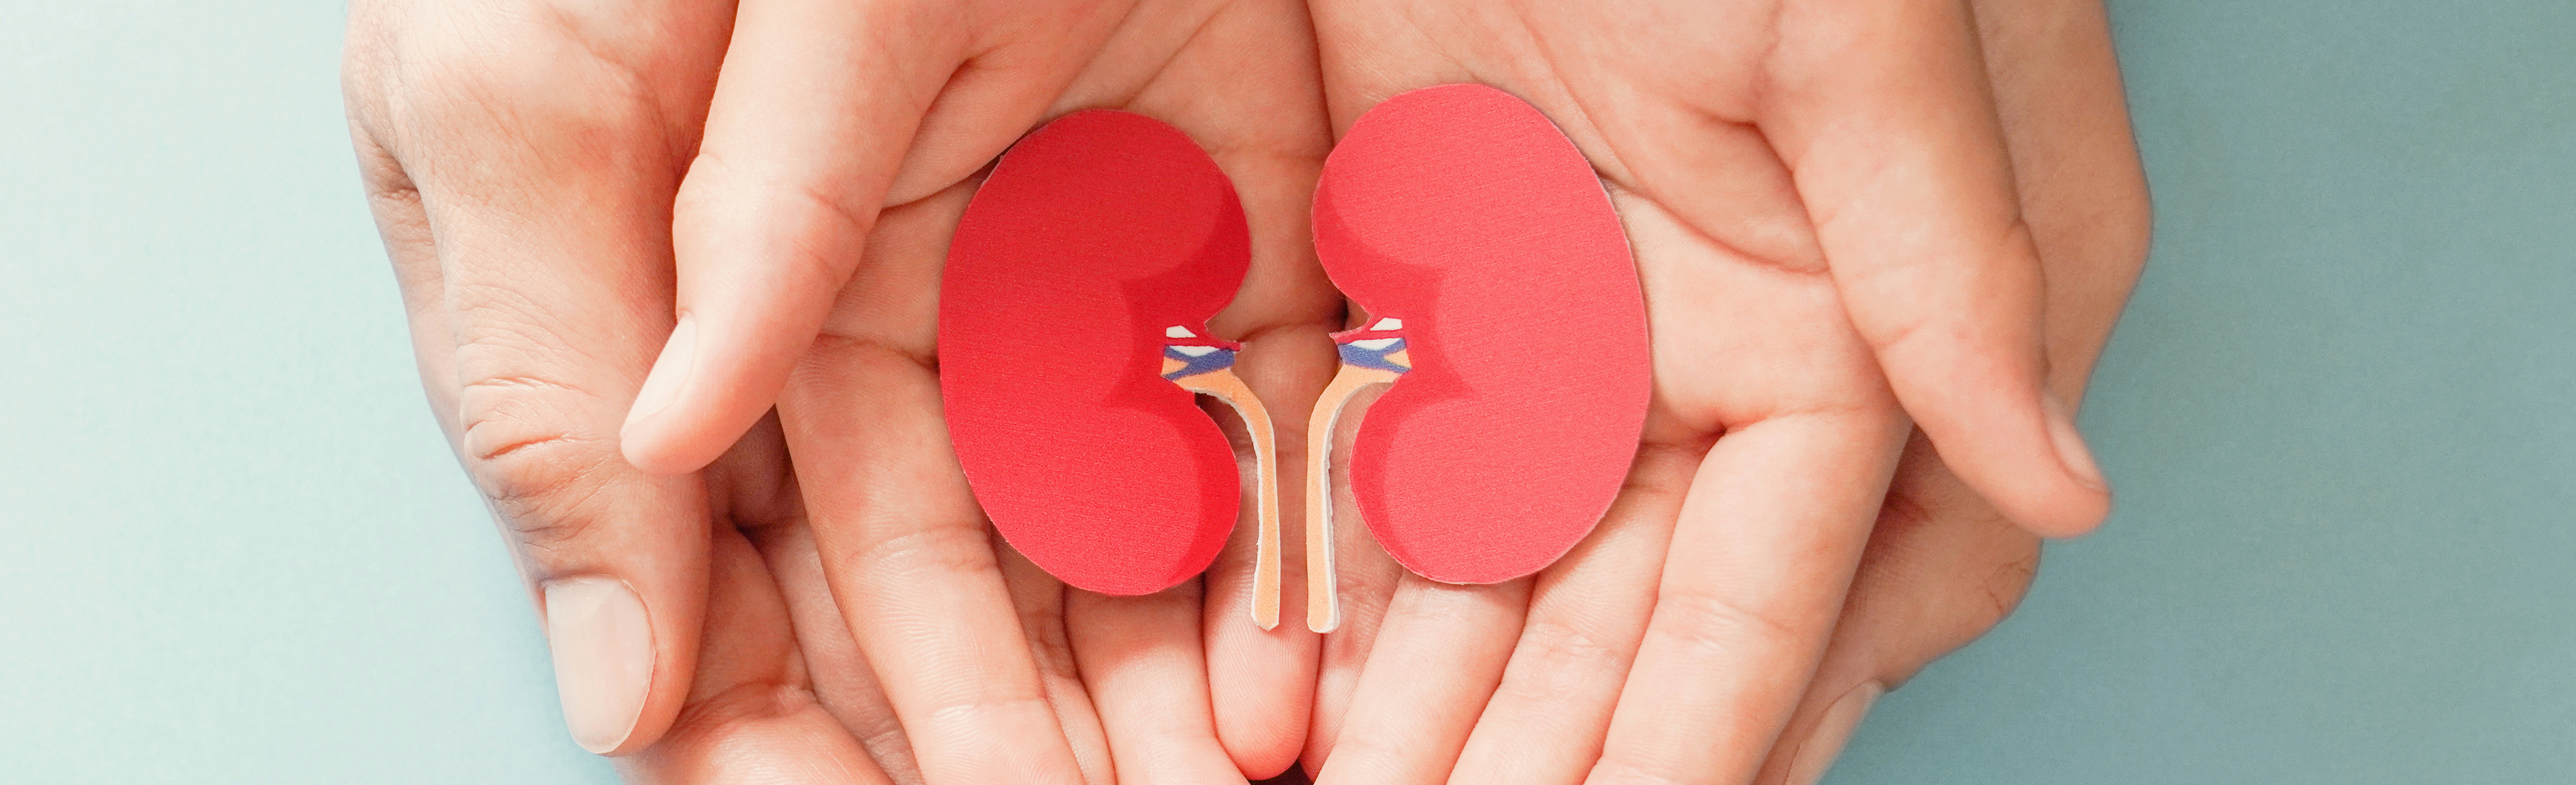 Adult and child hands holding red paper cut-out of kidneys